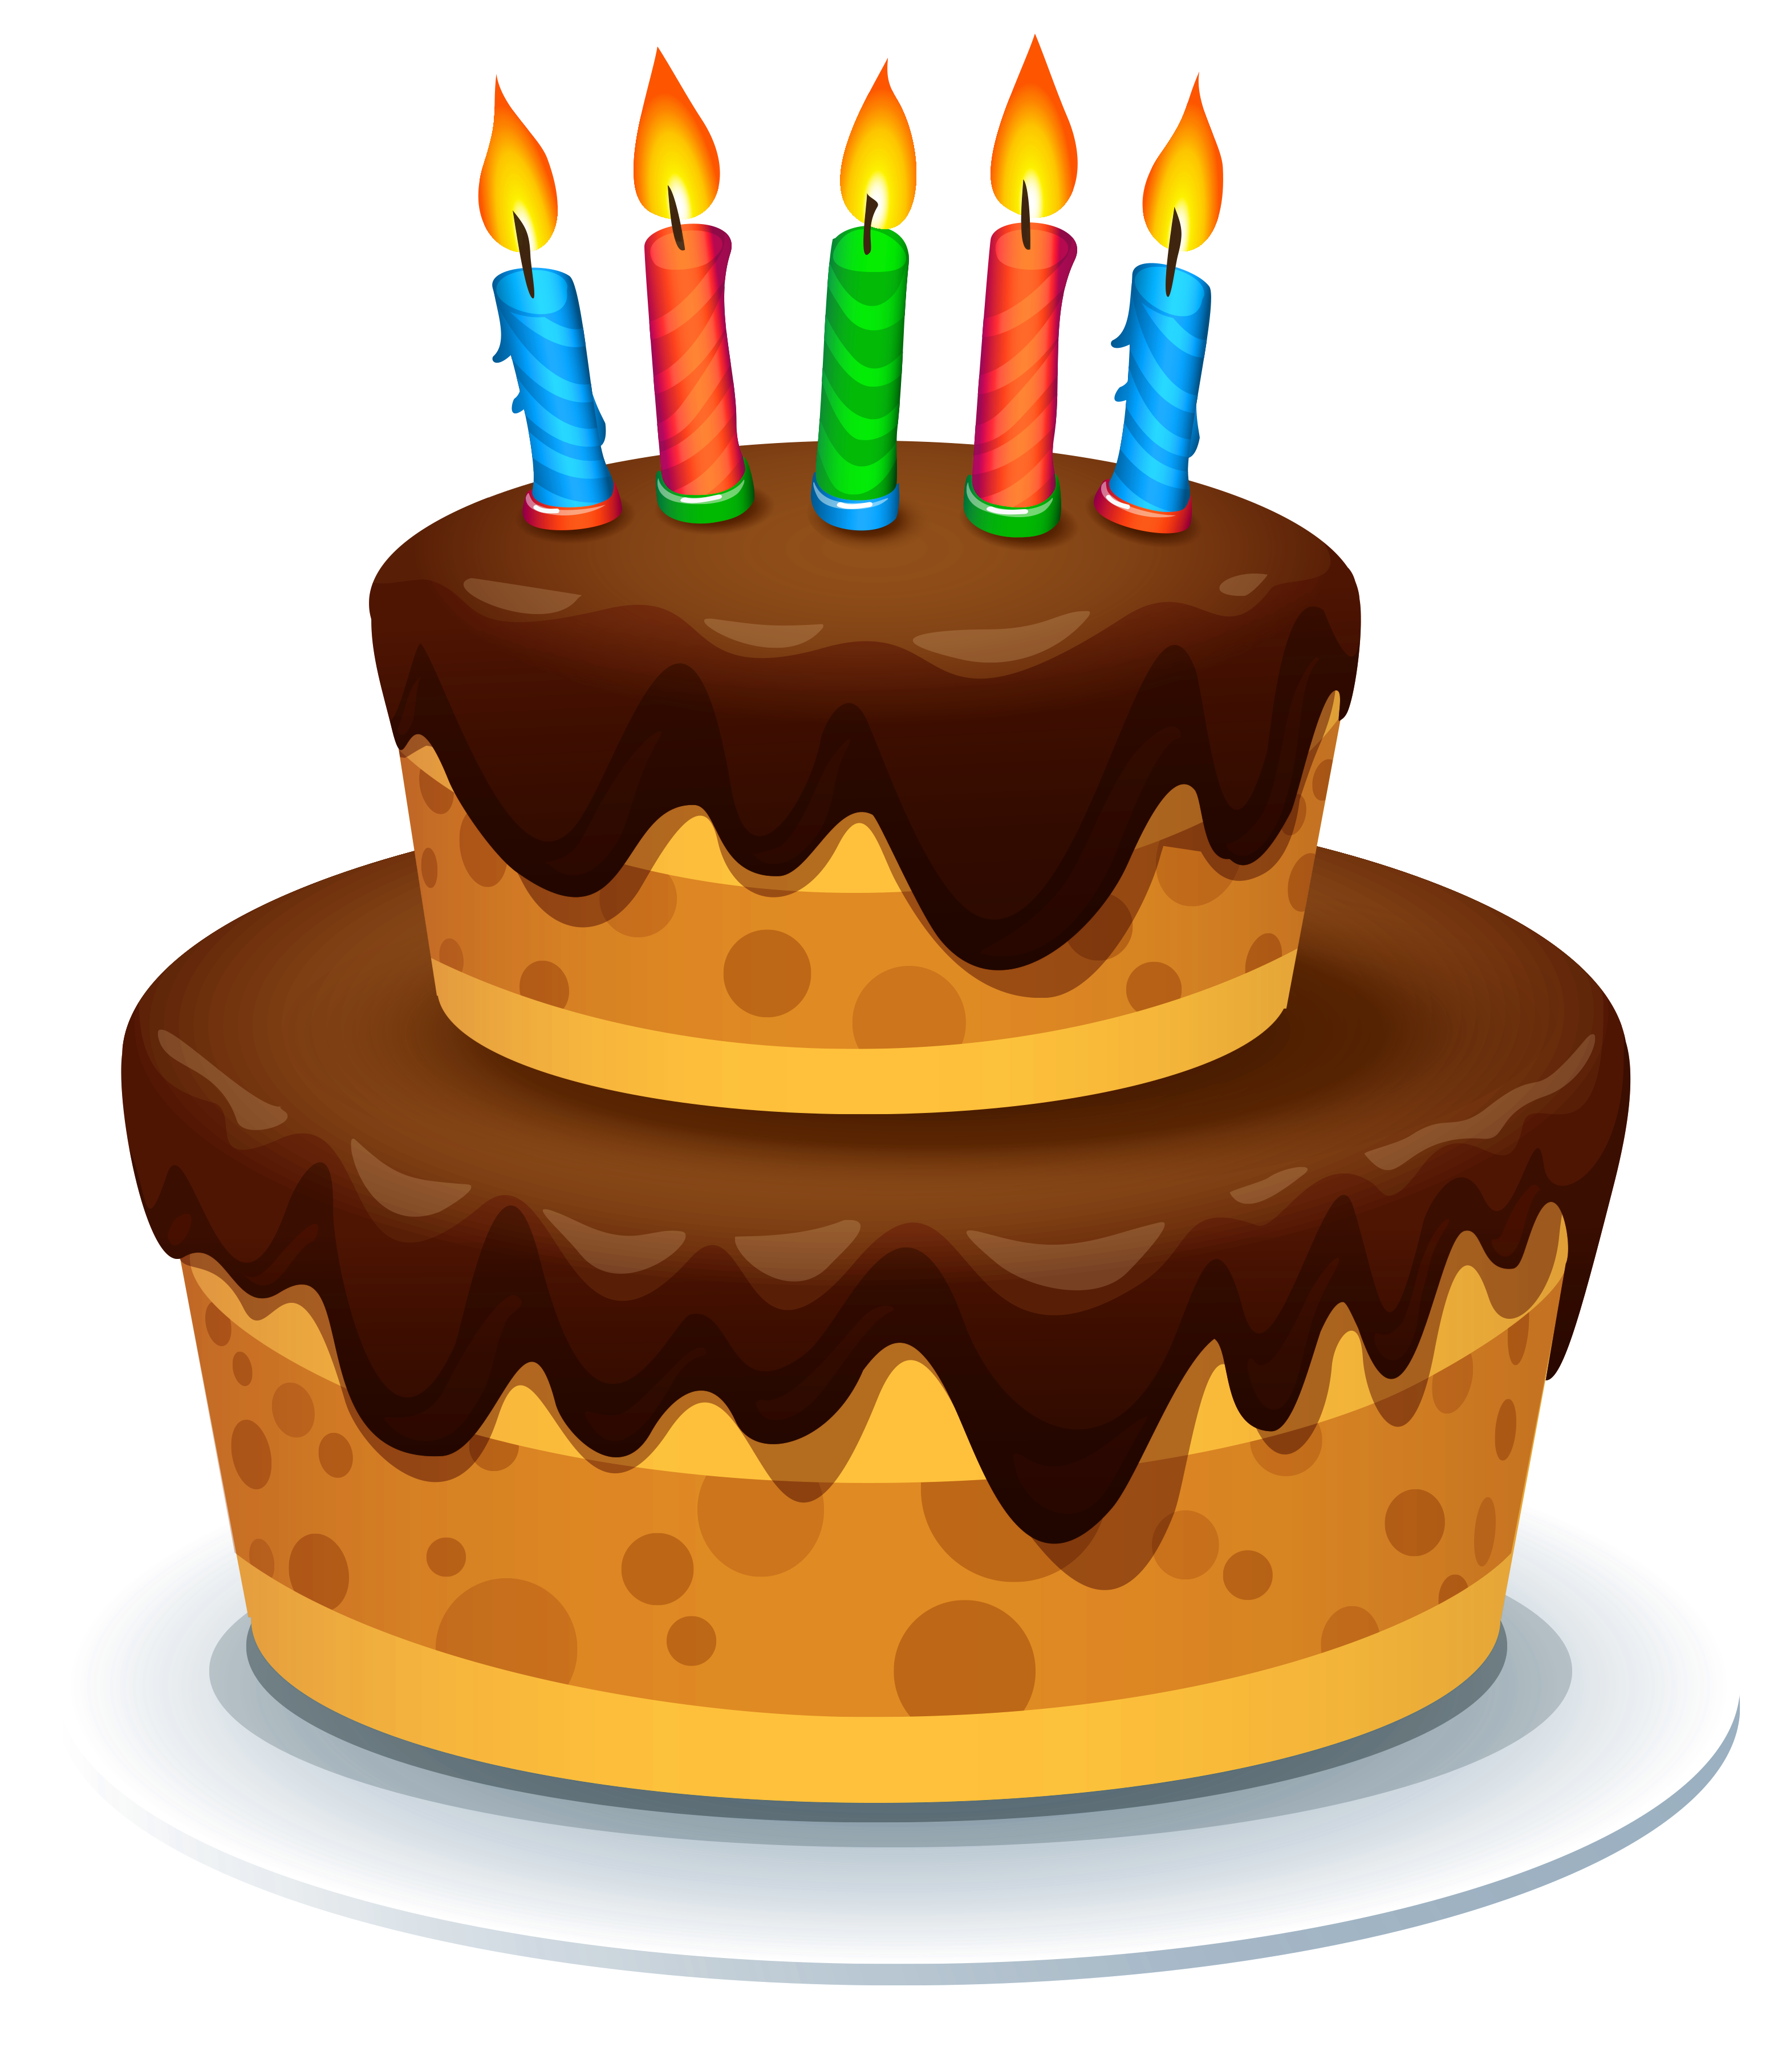 Cake with Candles PNG Clipart Image | Gallery Yopriceville - High